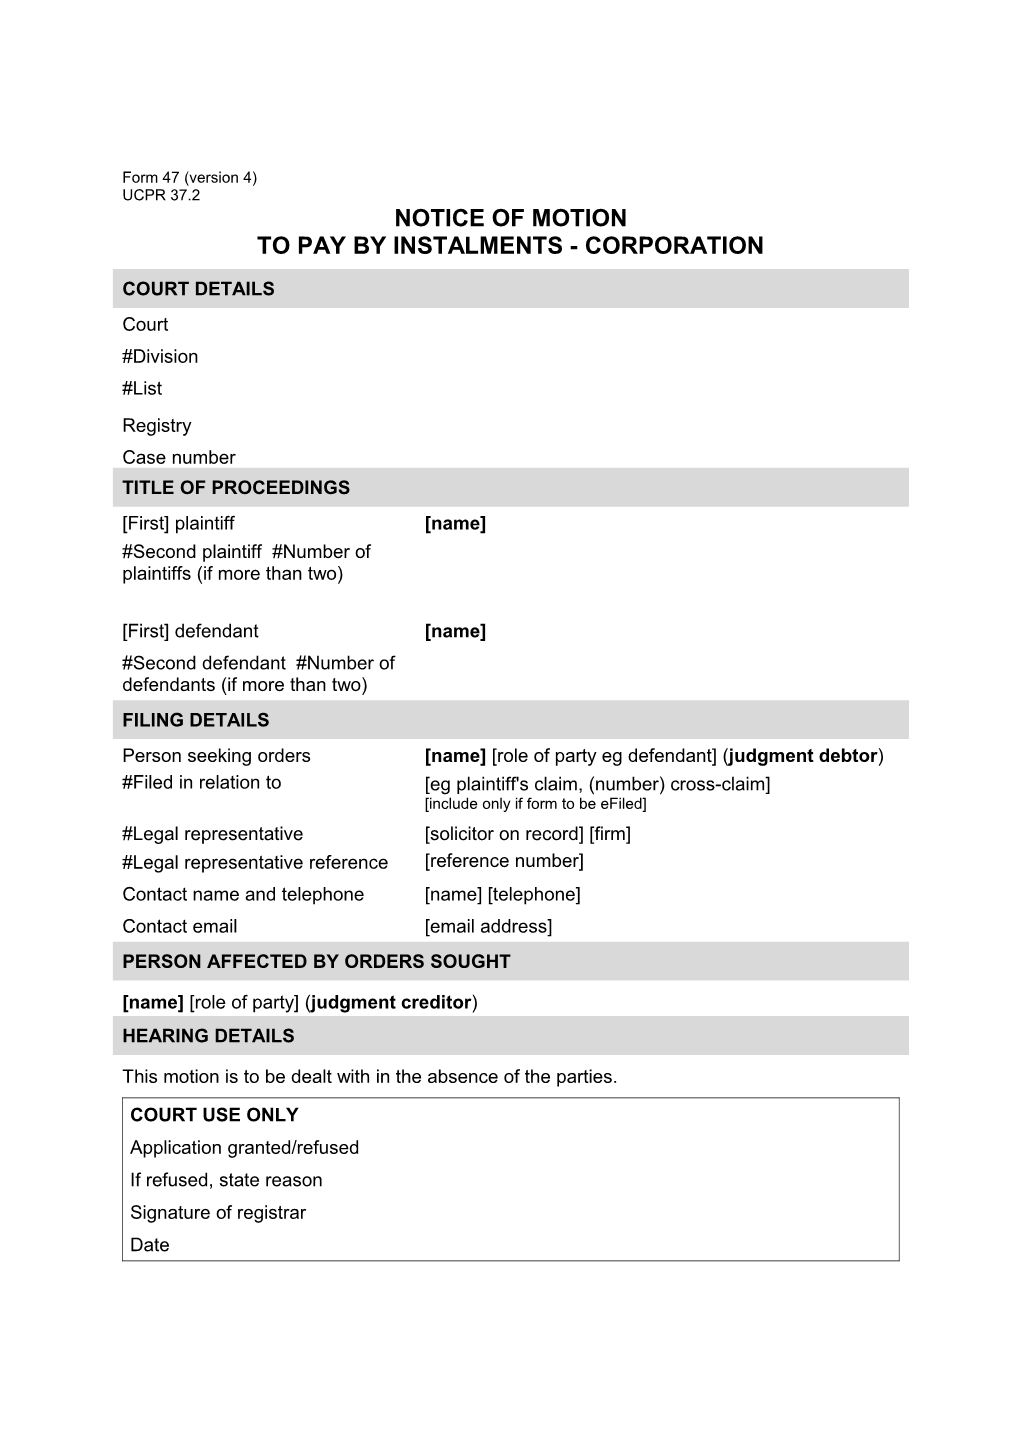 Form 47 - Notice of Motion to Pay by Instalments - Corporation